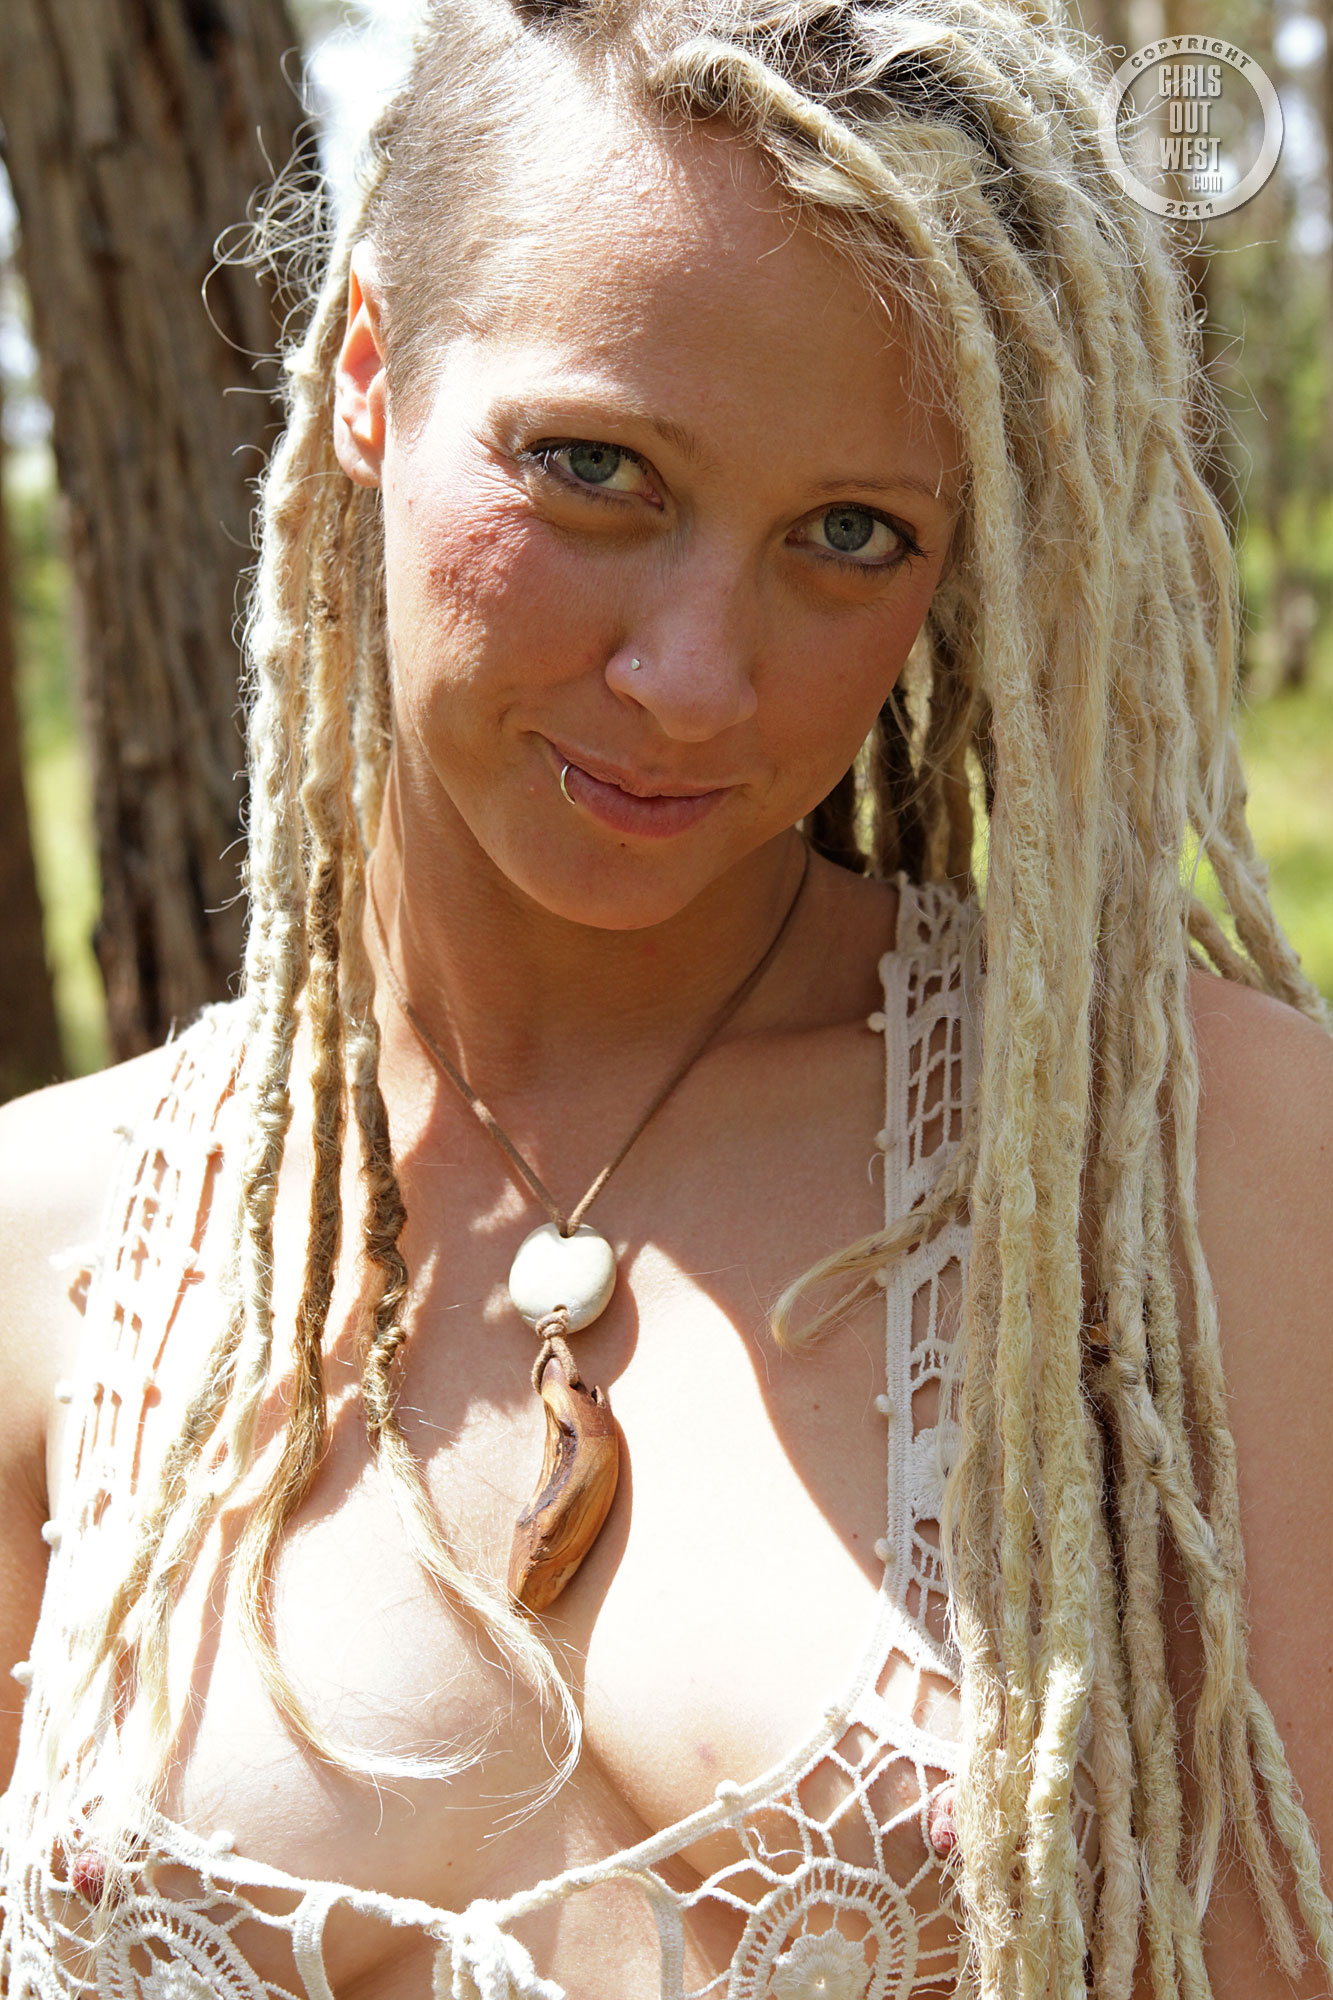 wpid-natural-curvy-blonde-with-dreadlocks-named-sunday-relaxing-in-the-woods1.jpg